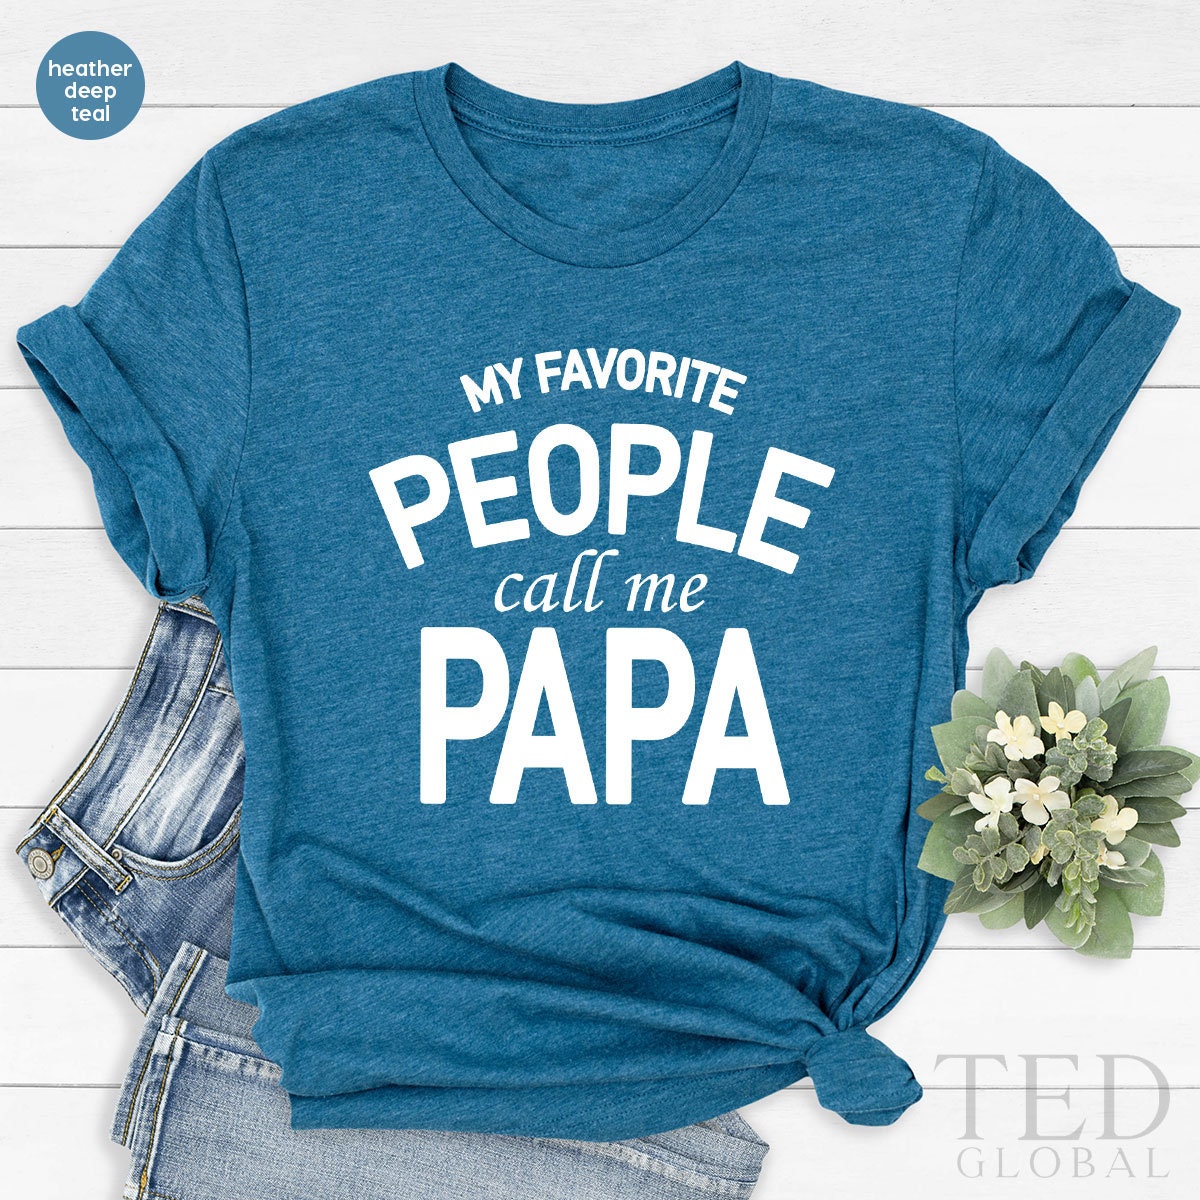 Fathers Day Tee, Papa Shirt, Gift For Dad, Grandpa Shirt, Daddy T Shirt, Best Dad Shirt, My Favorite People Call Me Papa, Fathers Day Gifts - Fastdeliverytees.com